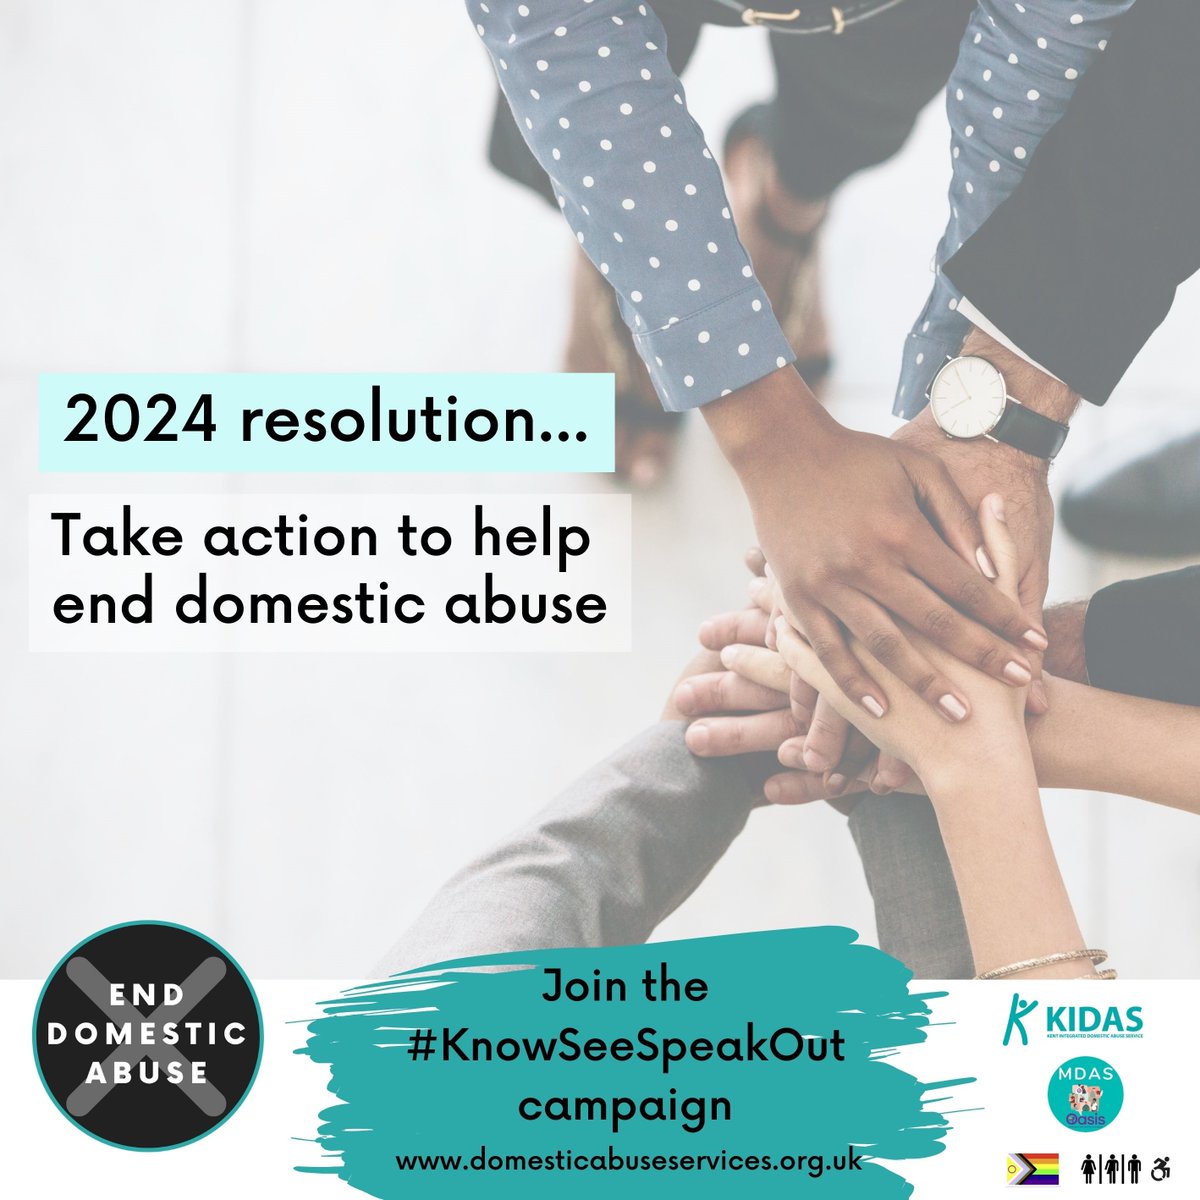 As resolutions are set for 2024, make it your mission to #EndDomesticAbuse so that no one in #Kent and #Medway suffers. Join the campaign at domesticabuseservices.org.uk. #NewYear2024 #NewYearResolutions #KnowSeeSpeakOut